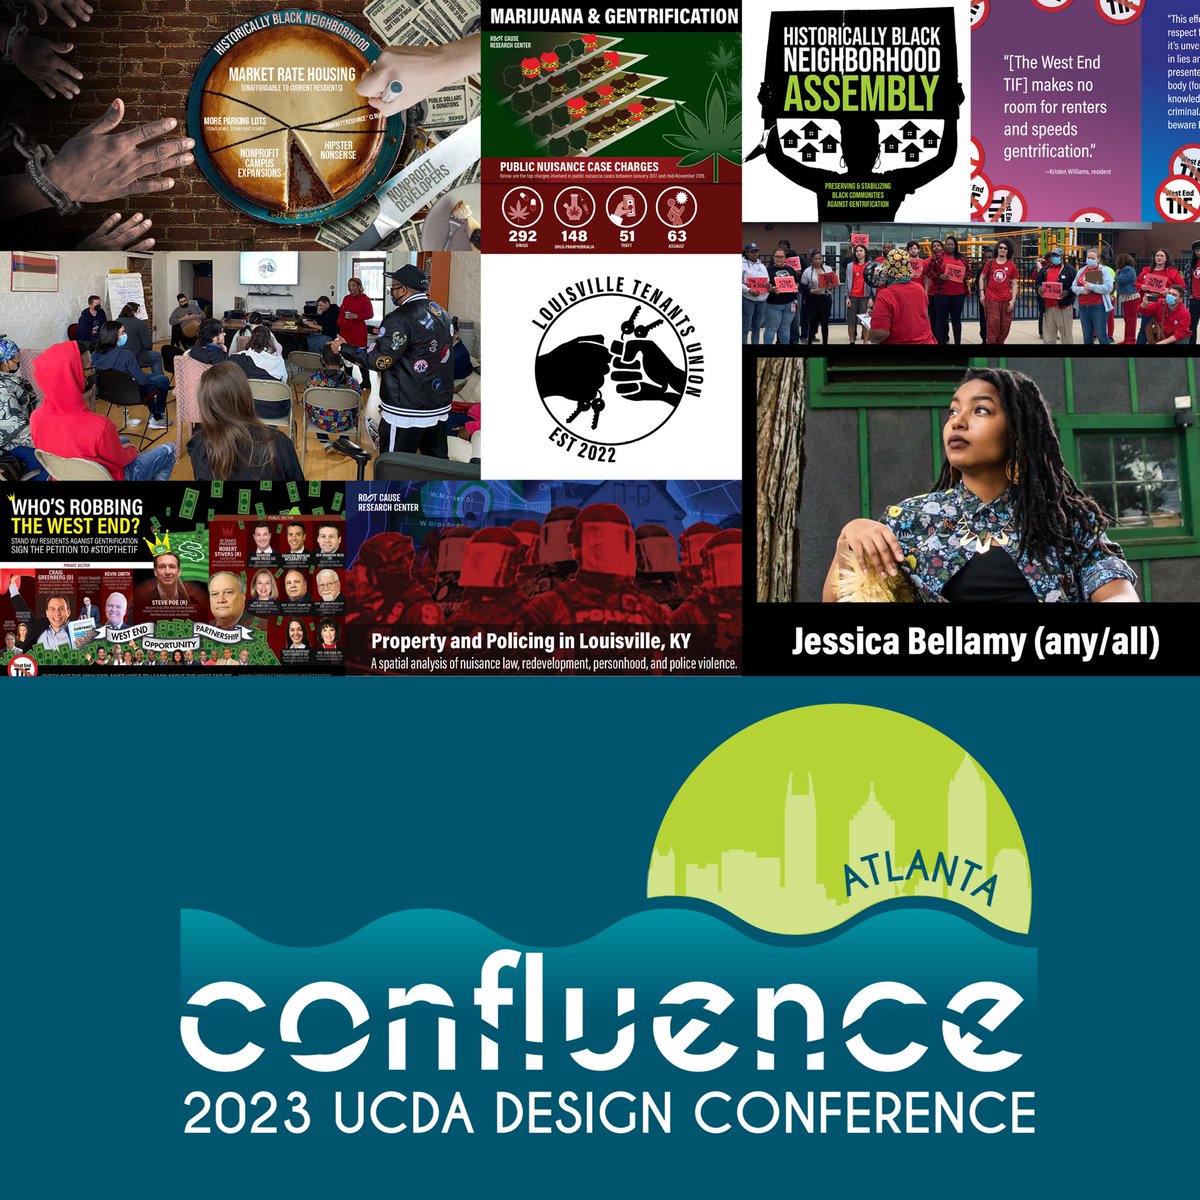 I'm excited to be a main stage speaker at the 2023 UCDA Design Conference! I’ll be talking about and show examples of the graphics I’ve created in support of our tenant organizing work here in Louisville, KY. #UCDA2023 #housingisahumanright